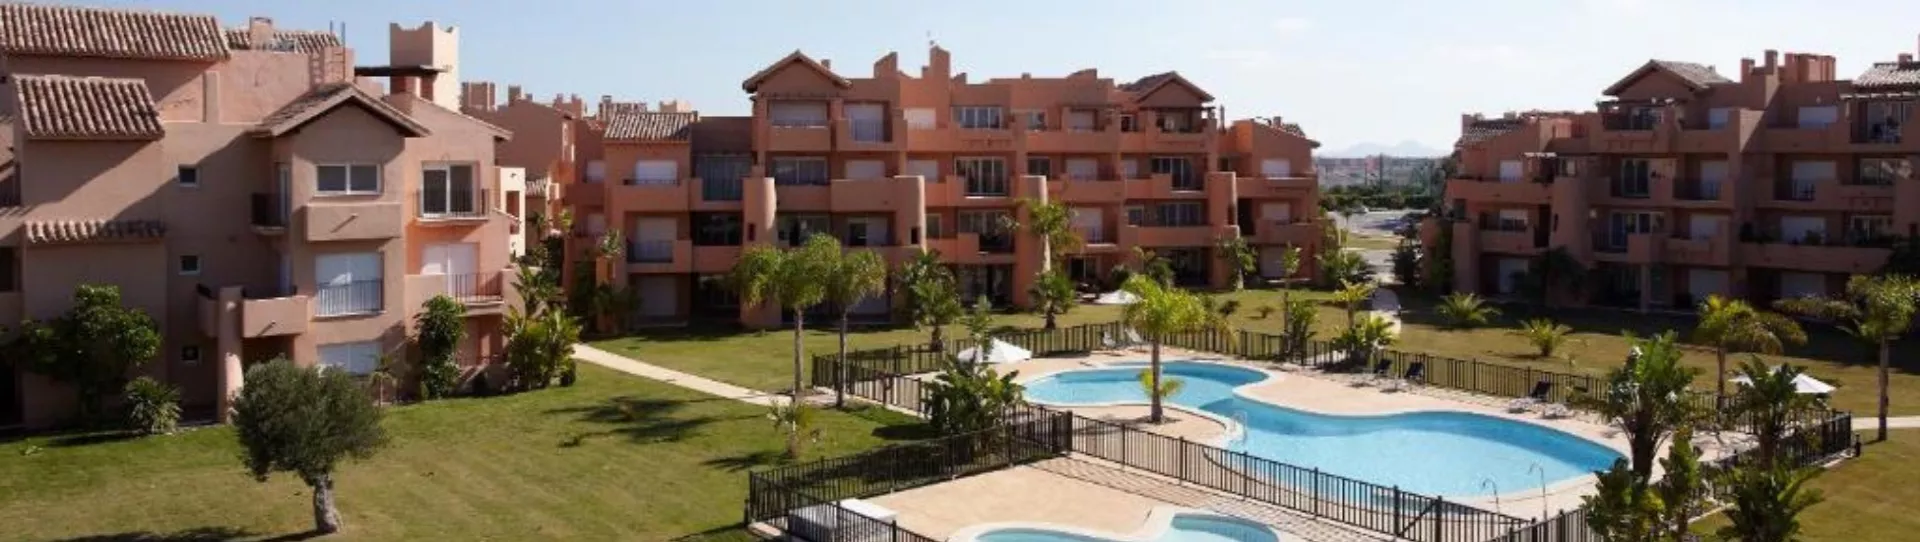 Spain golf holidays - 3 Nights BB & 2 Golf Rounds<br>Groups of 4 - Photo 2